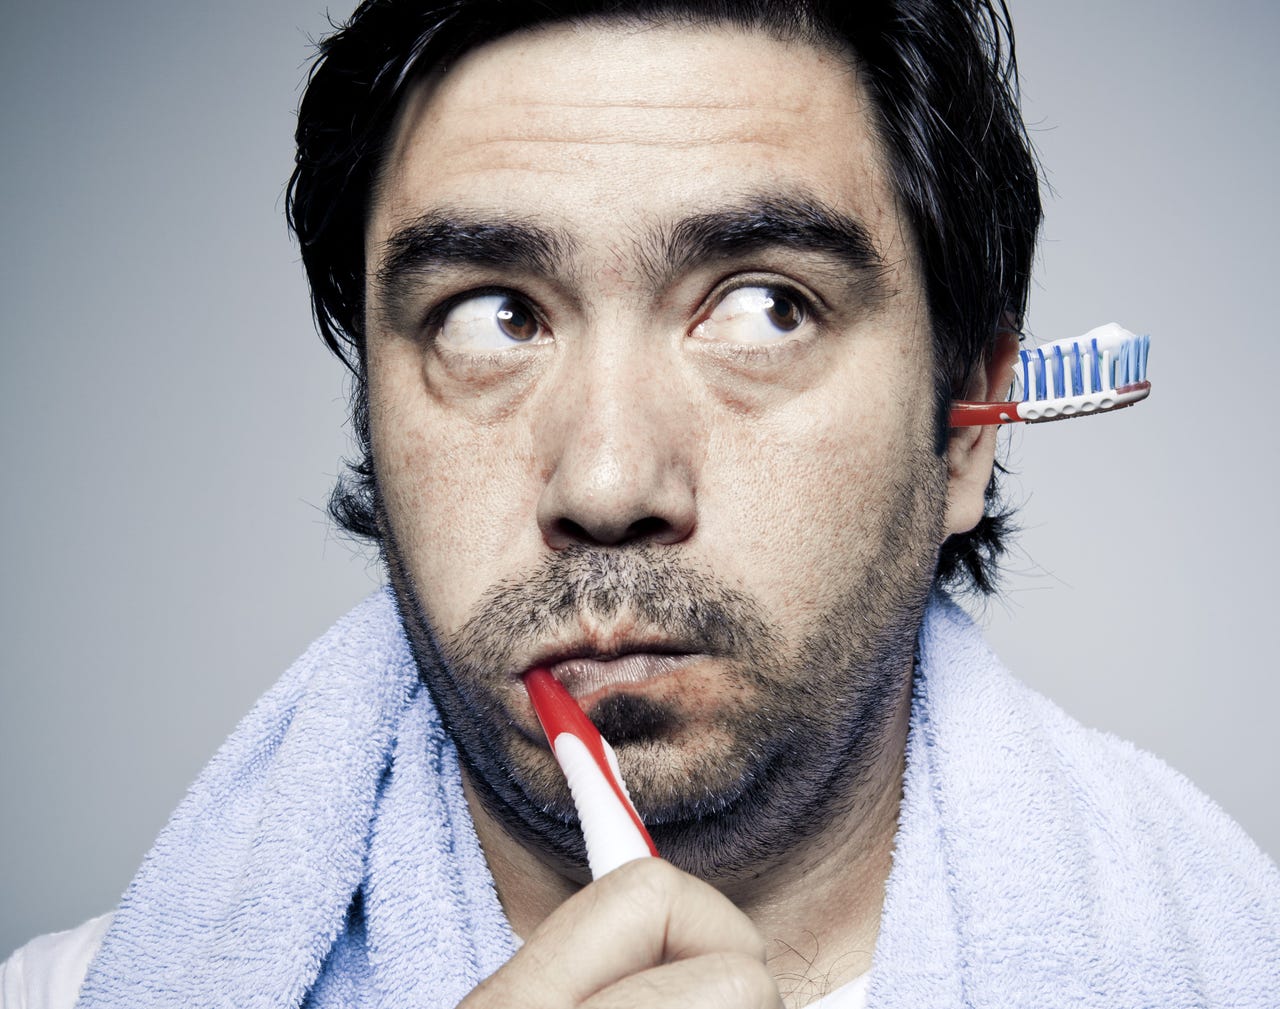 toothbrush2-gettyimages-157602120